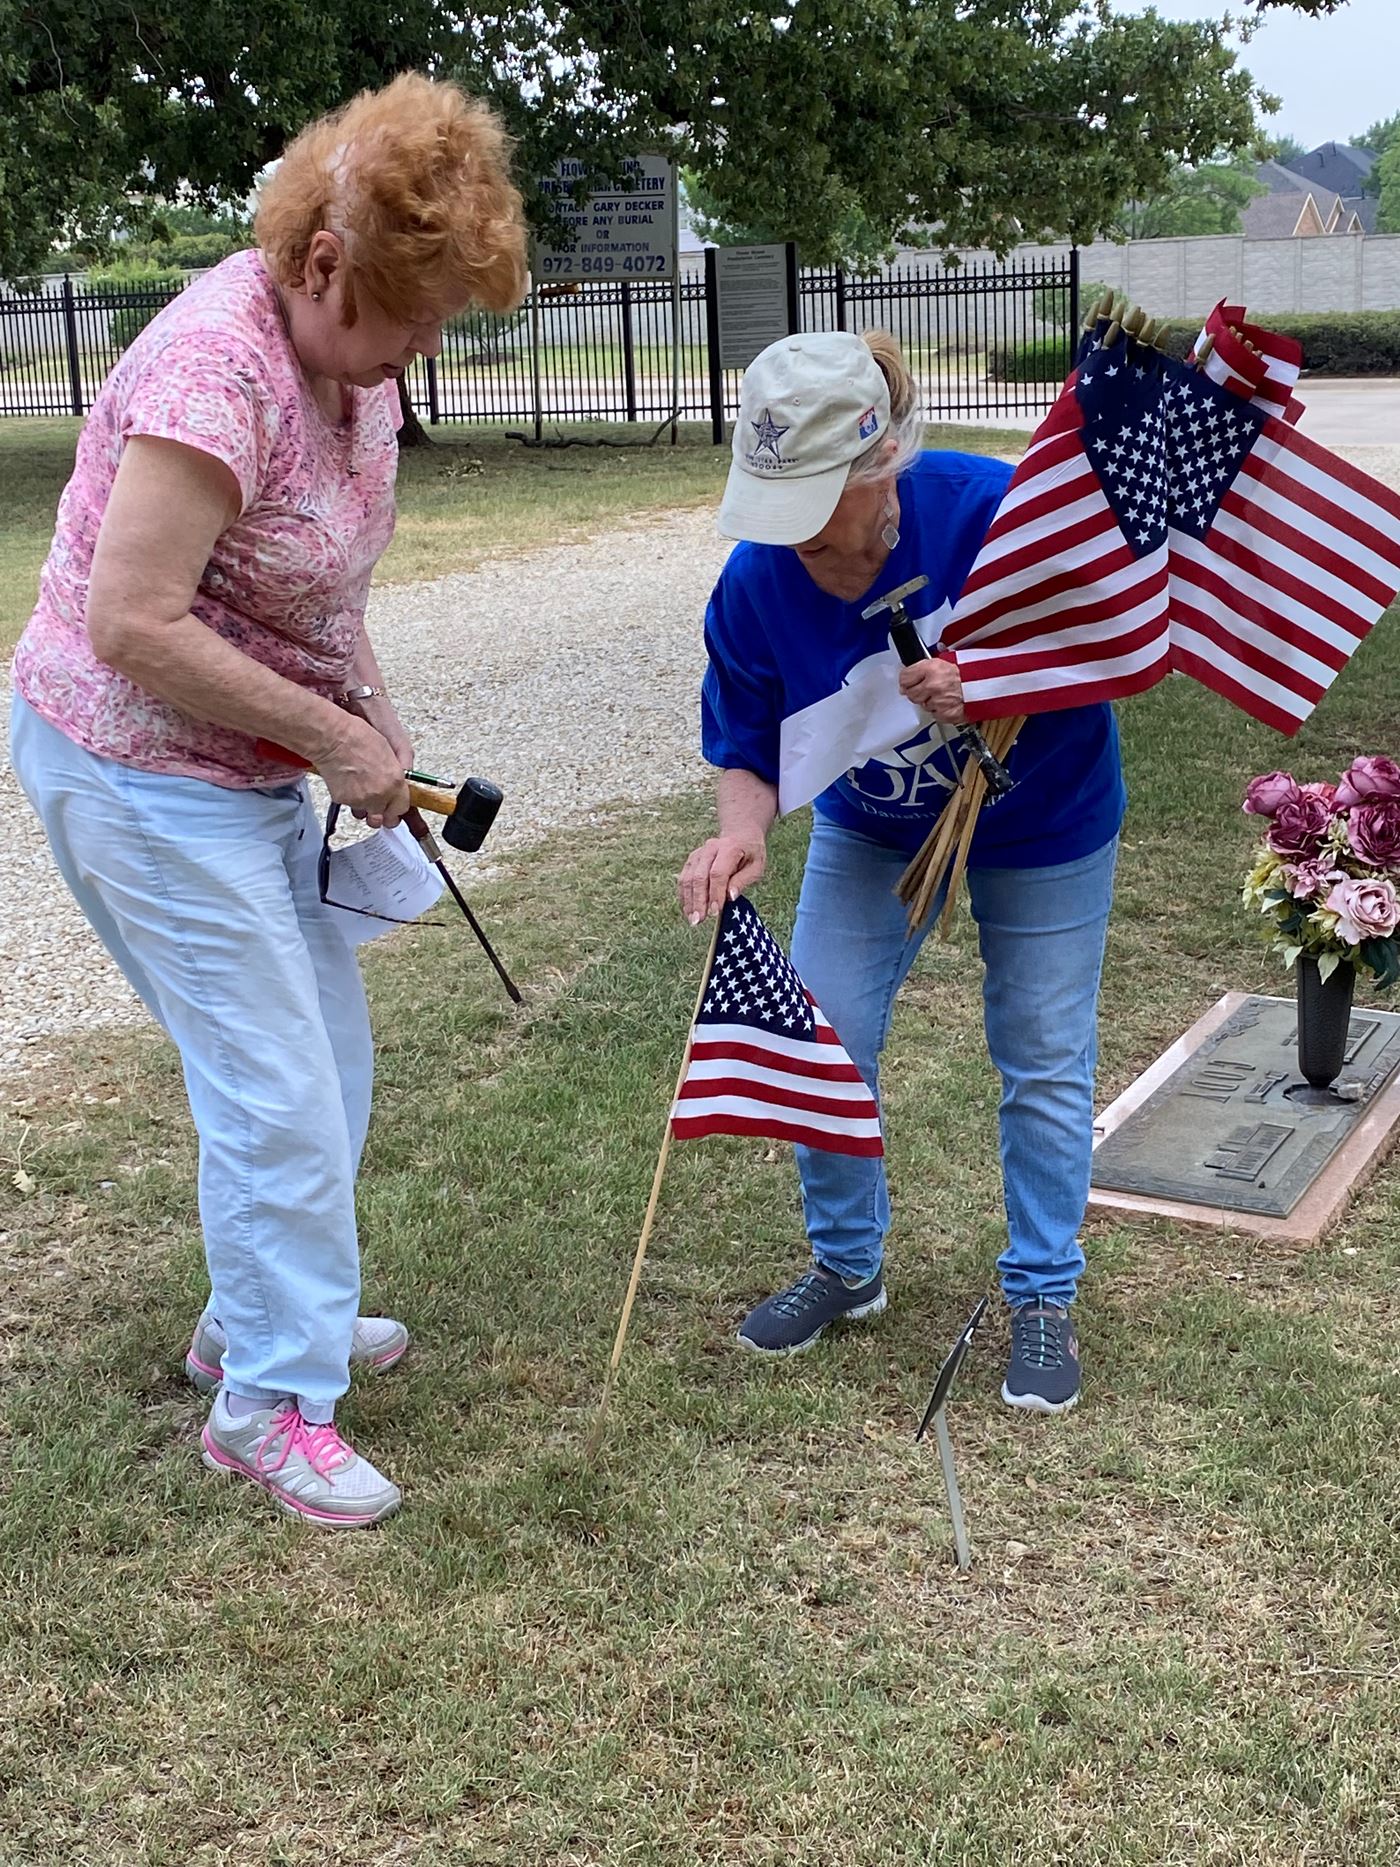 DAR members place flags to Remember and Honor our veterans.